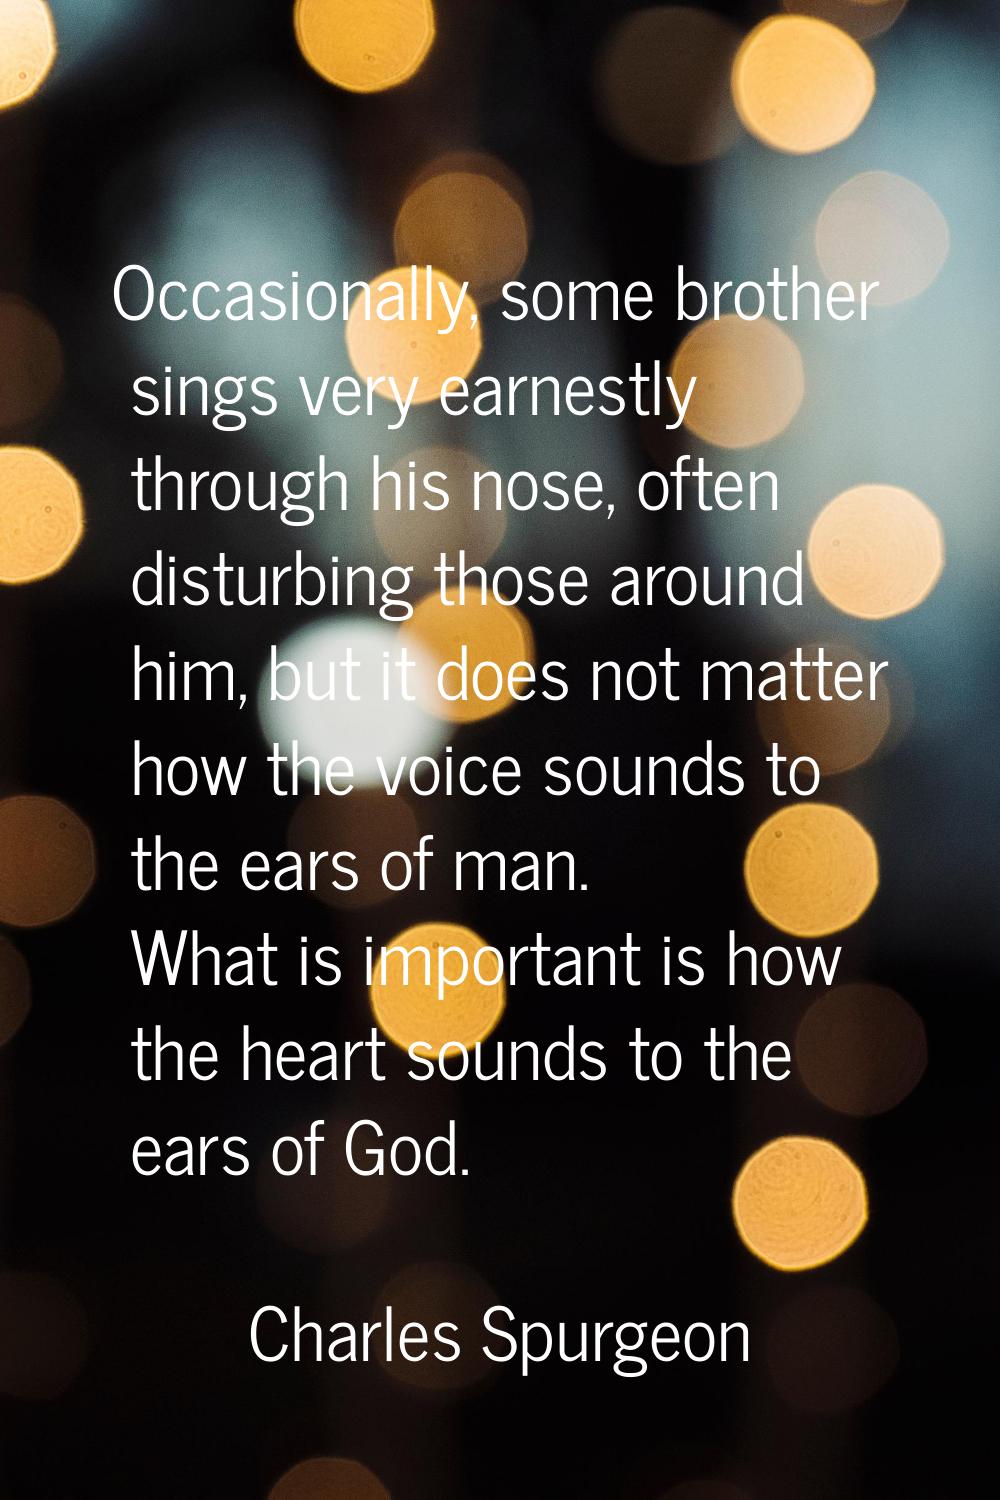 Occasionally, some brother sings very earnestly through his nose, often disturbing those around him